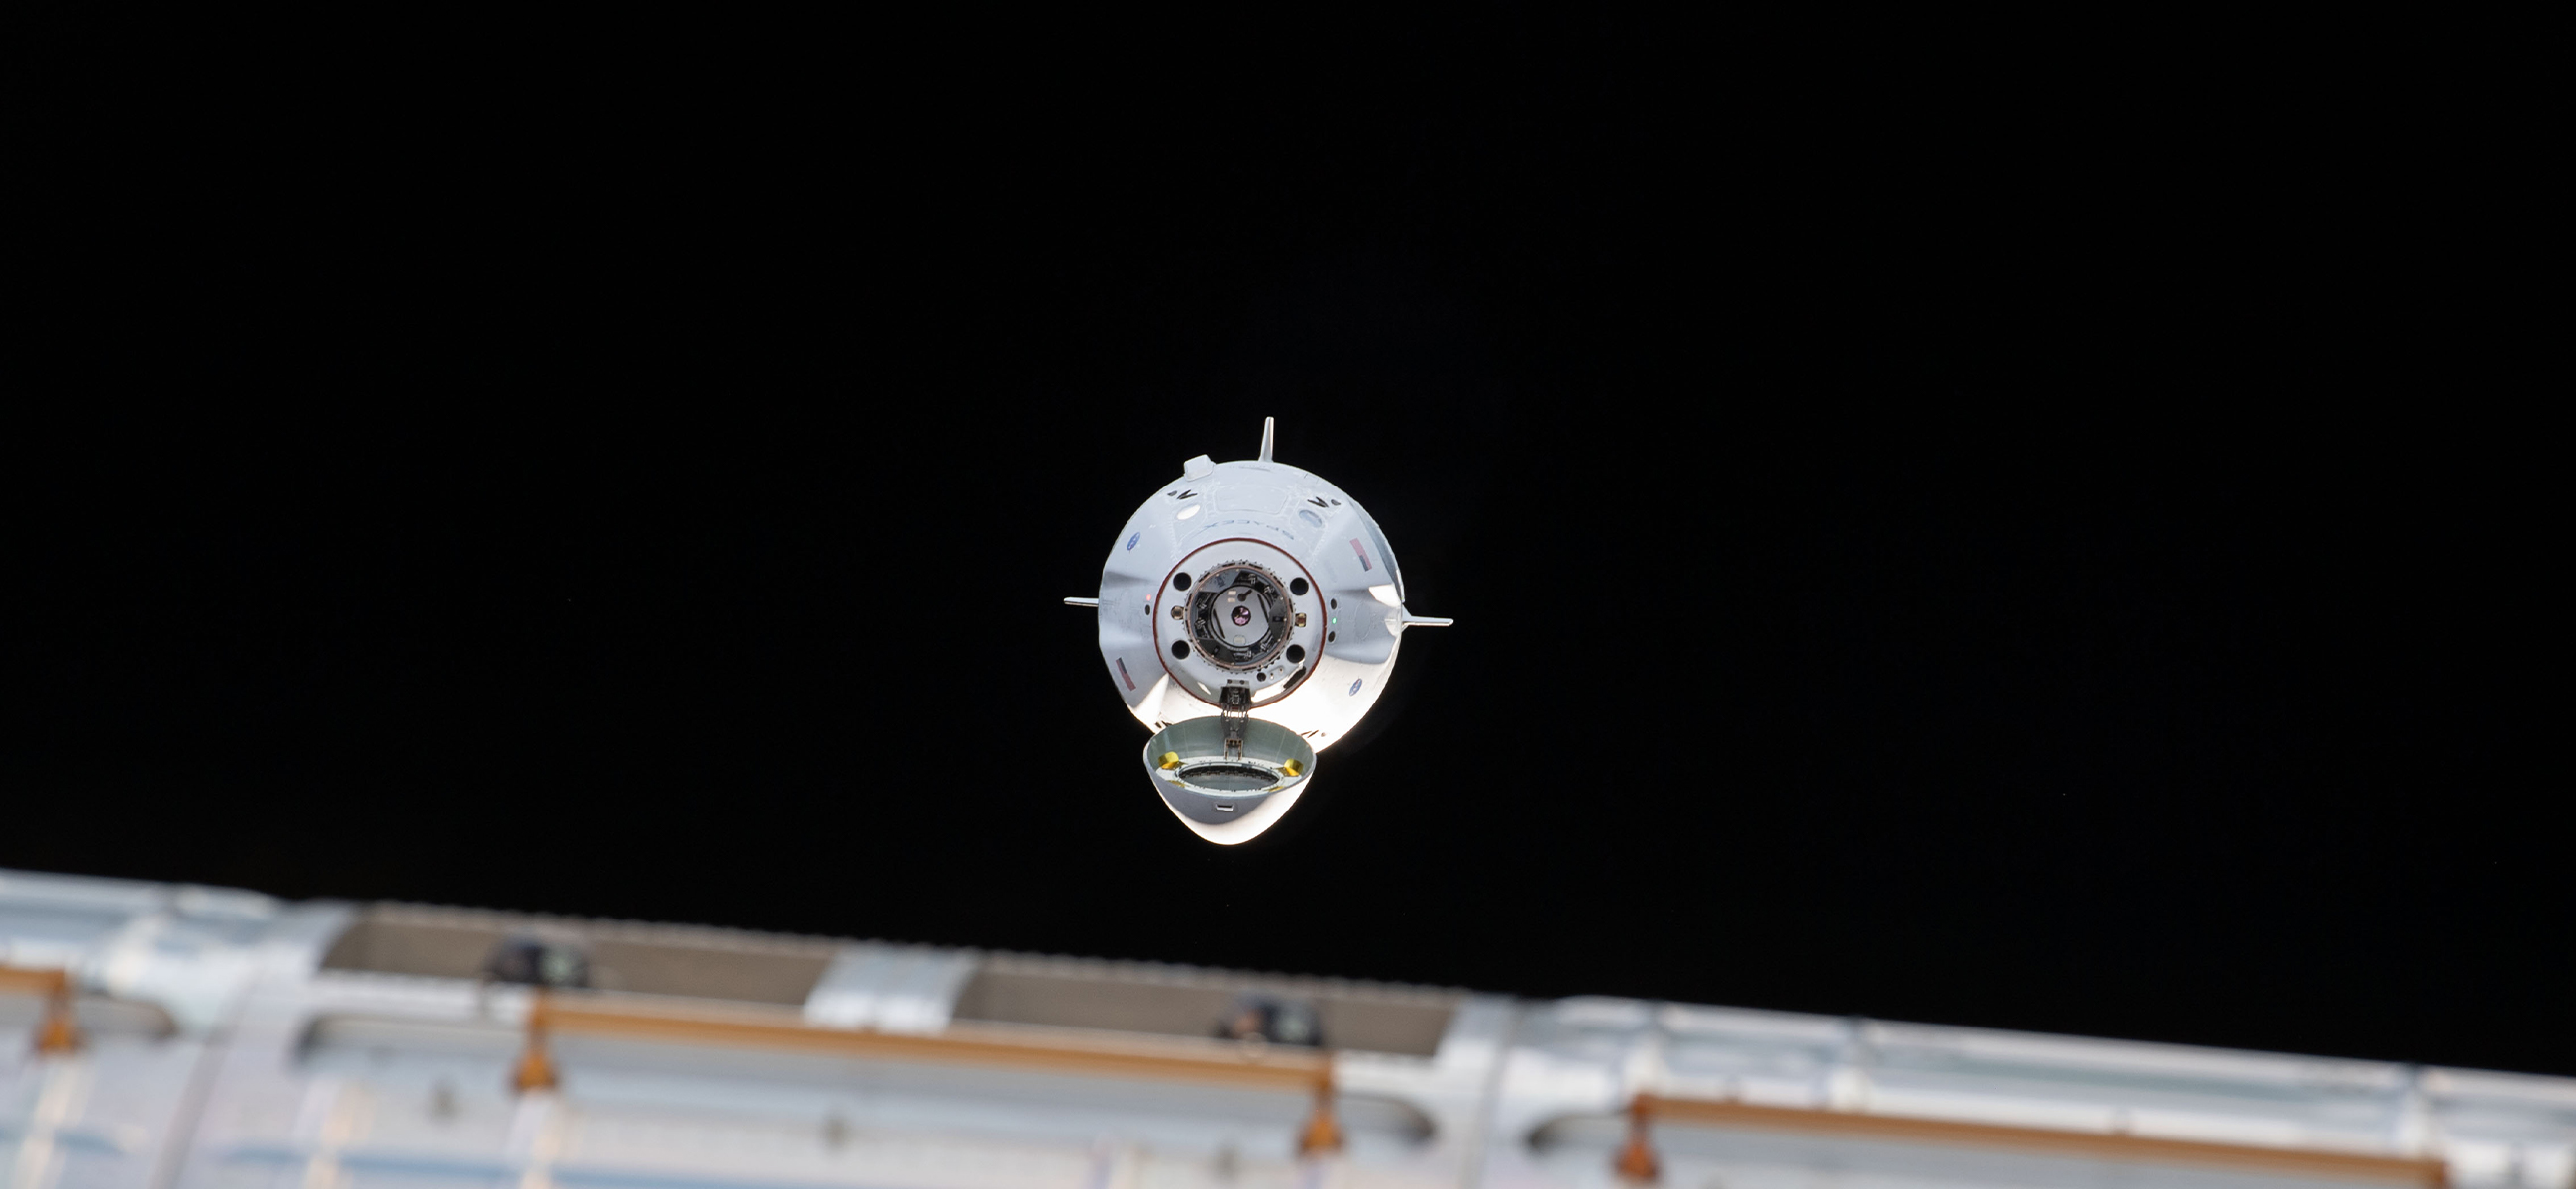 SpaceX Crew Dragon on approach to the ISS.